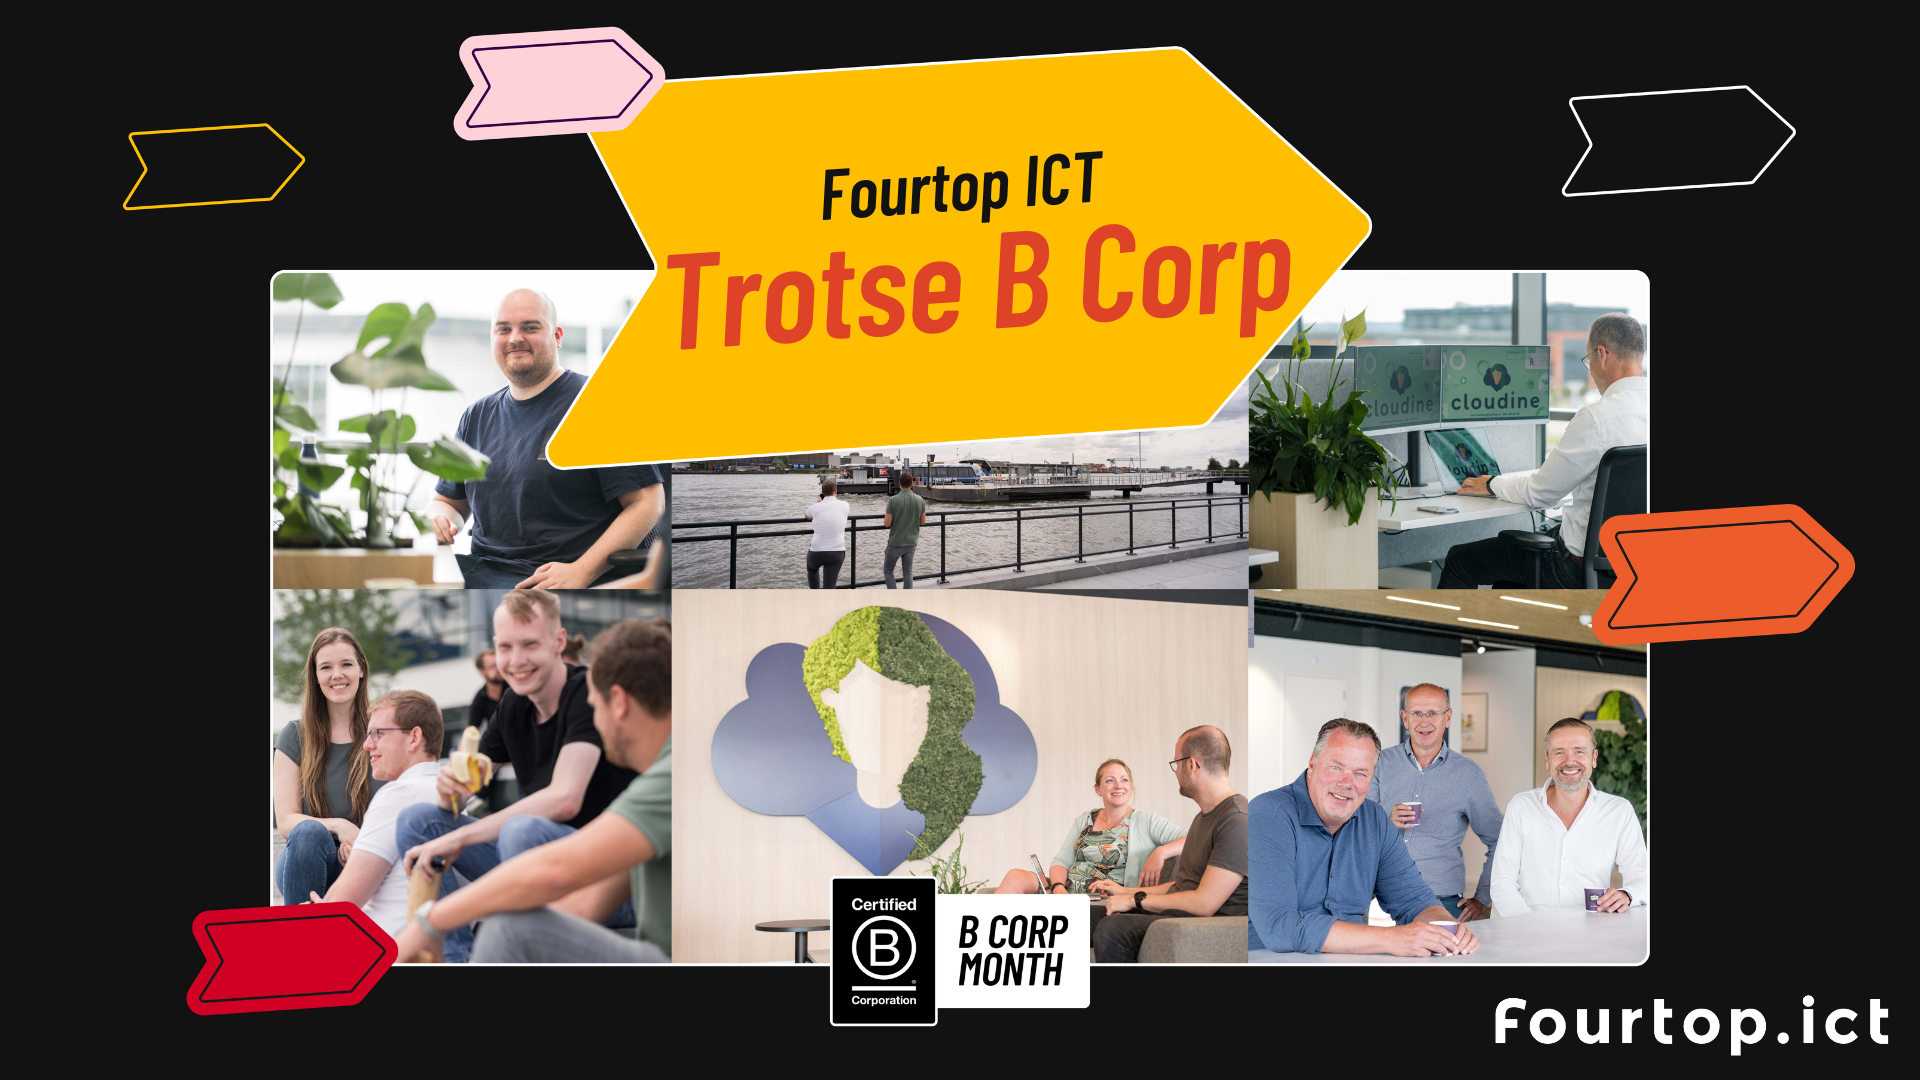 B Corp month - Fourtop ICT